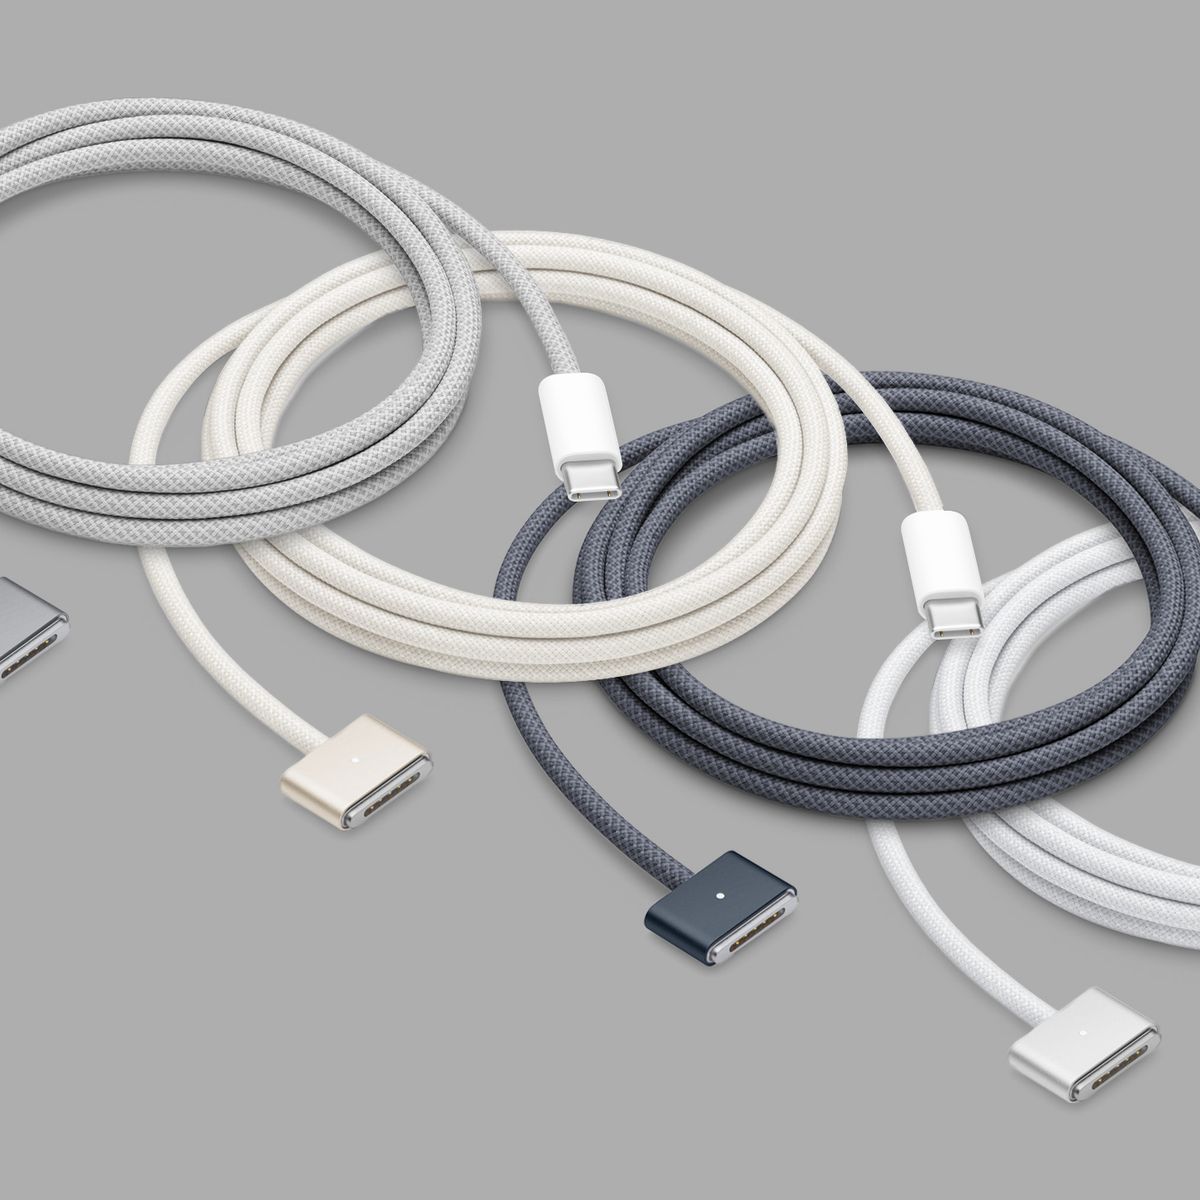 Apple's USB-C to MagSafe 3 Cable Is Now Available in 3 New Colors - CNET